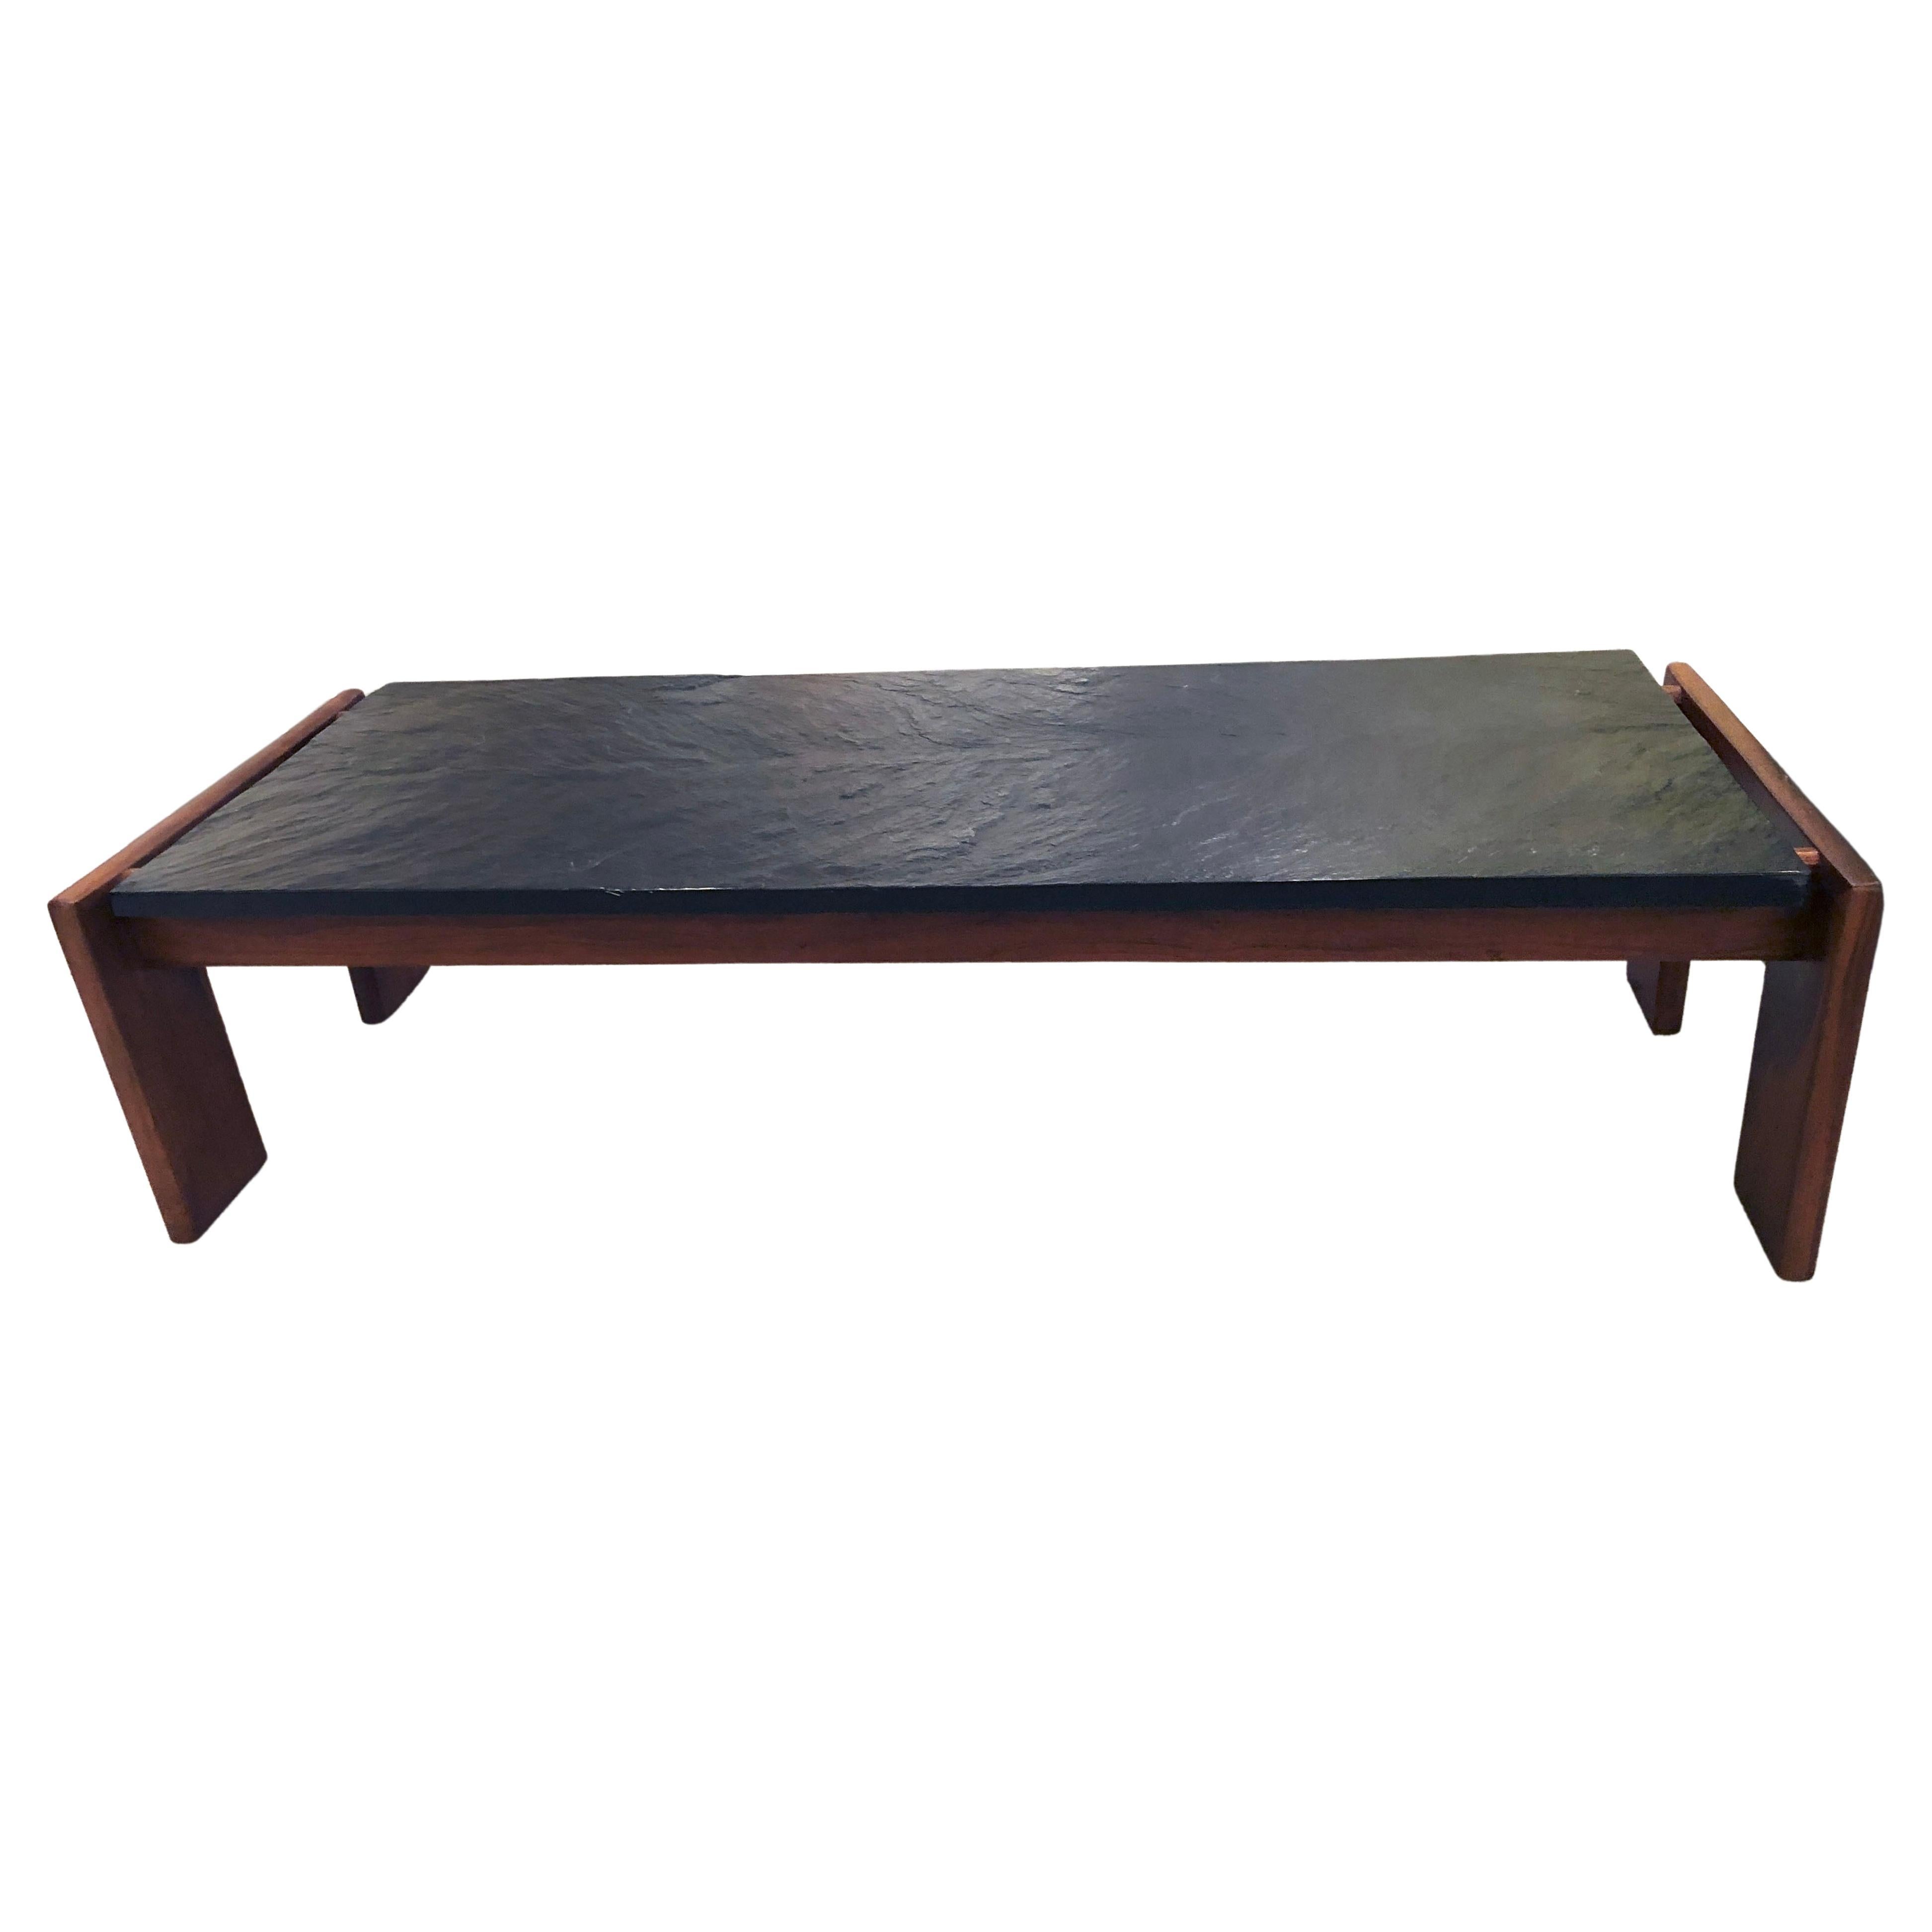 Walnut Adrian Pearsall for Craft Associates Coffee Table with Faux Slate Top